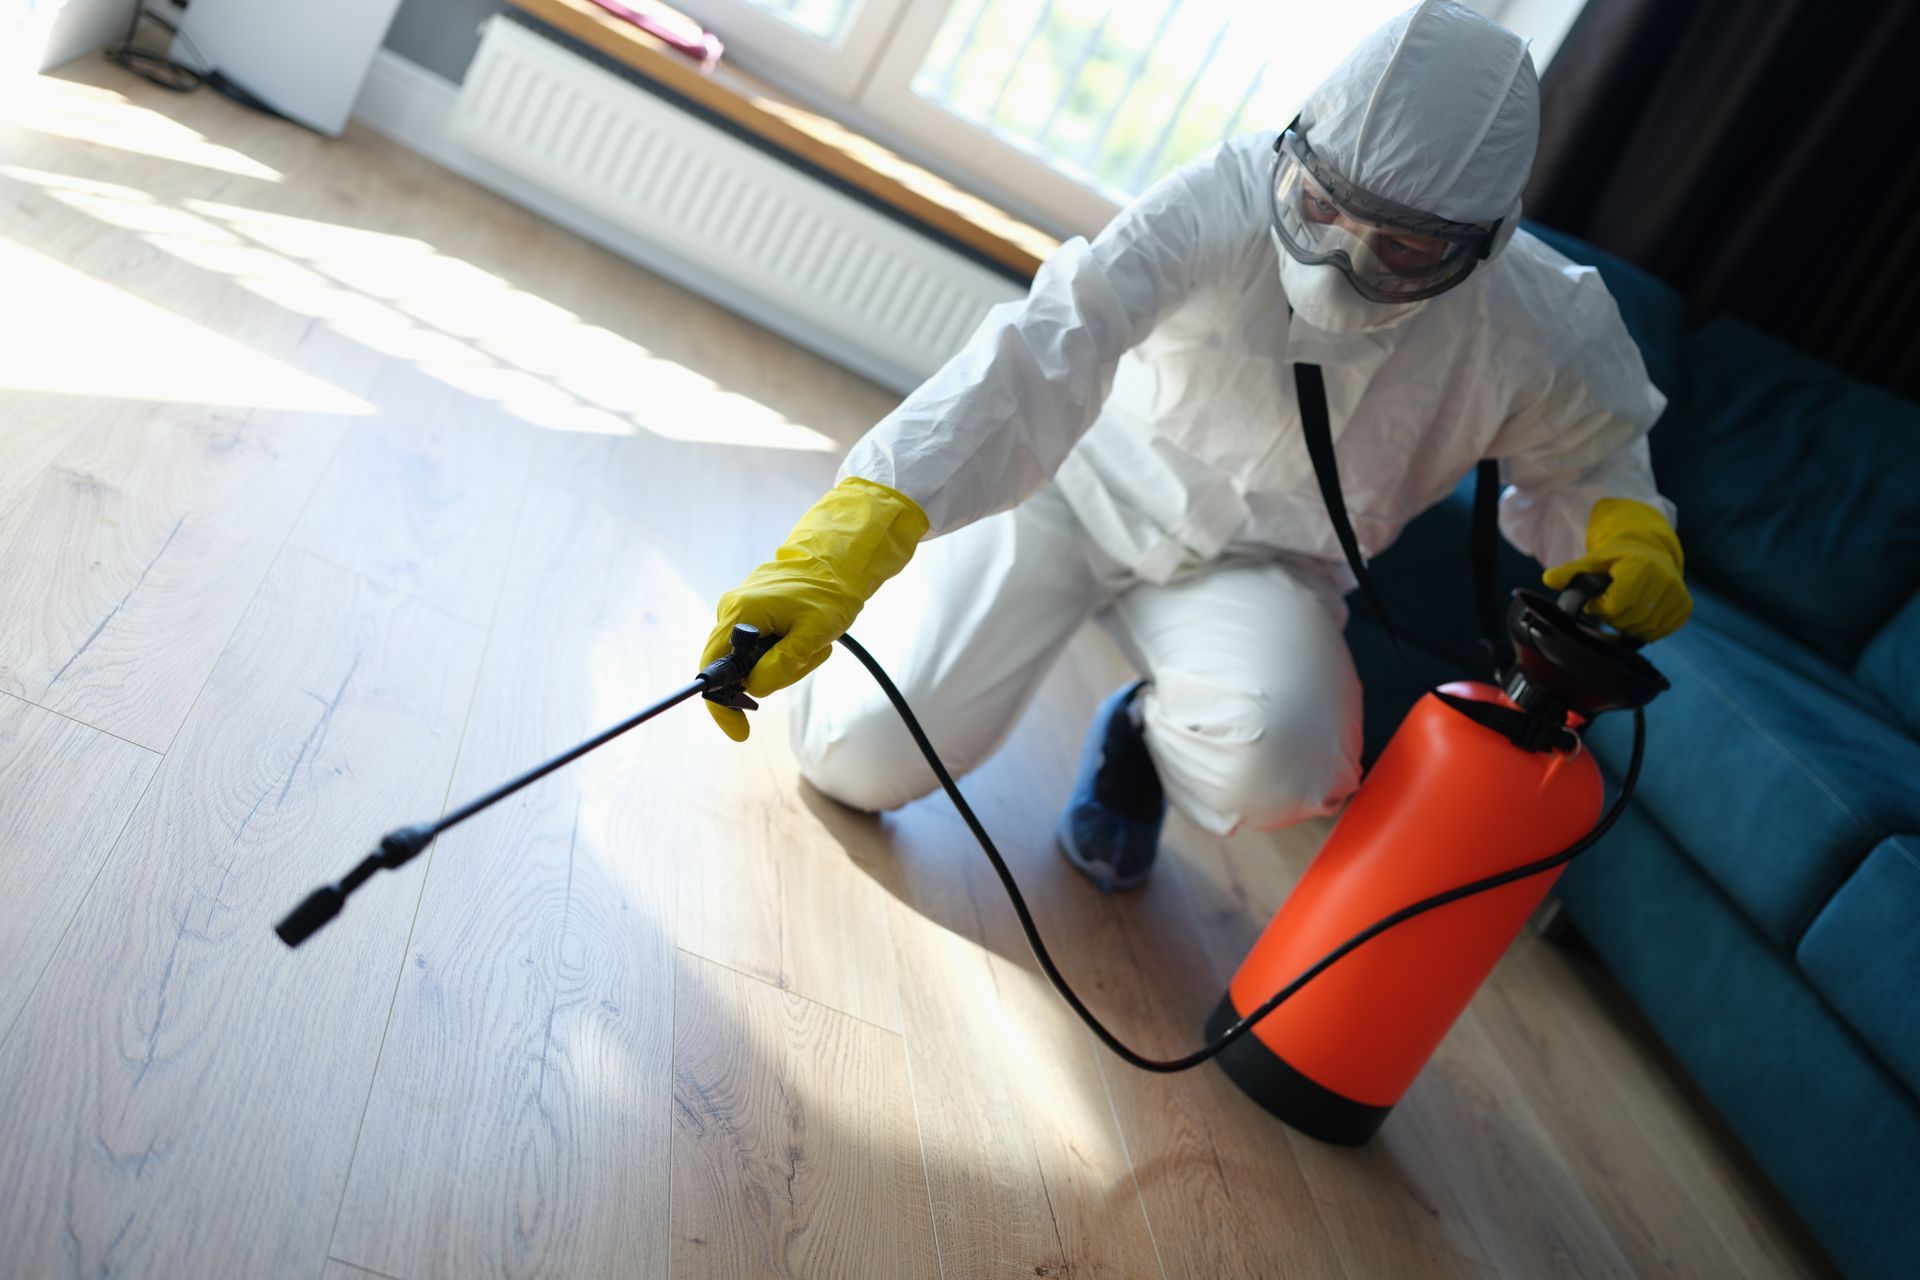 a man in a protective suit is spraying a wooden floor with a sprayer .